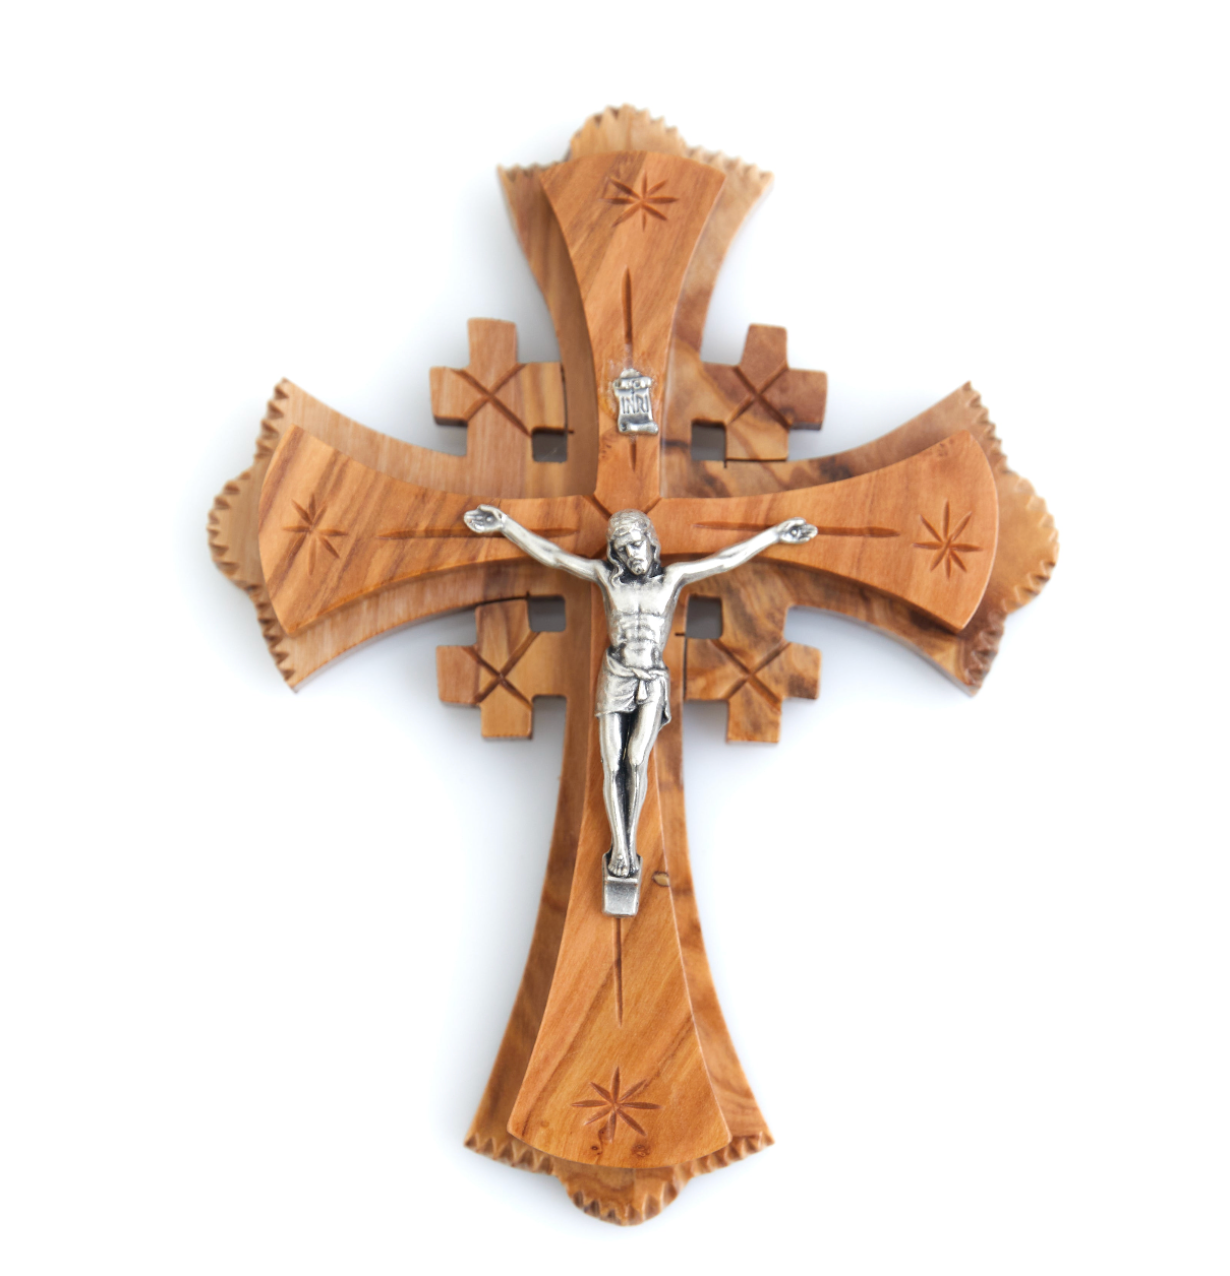 Wooden Crucifix, Wall Hanging Cross with Silver Plated Jesus Christ Corpus, INRI, Hand Made